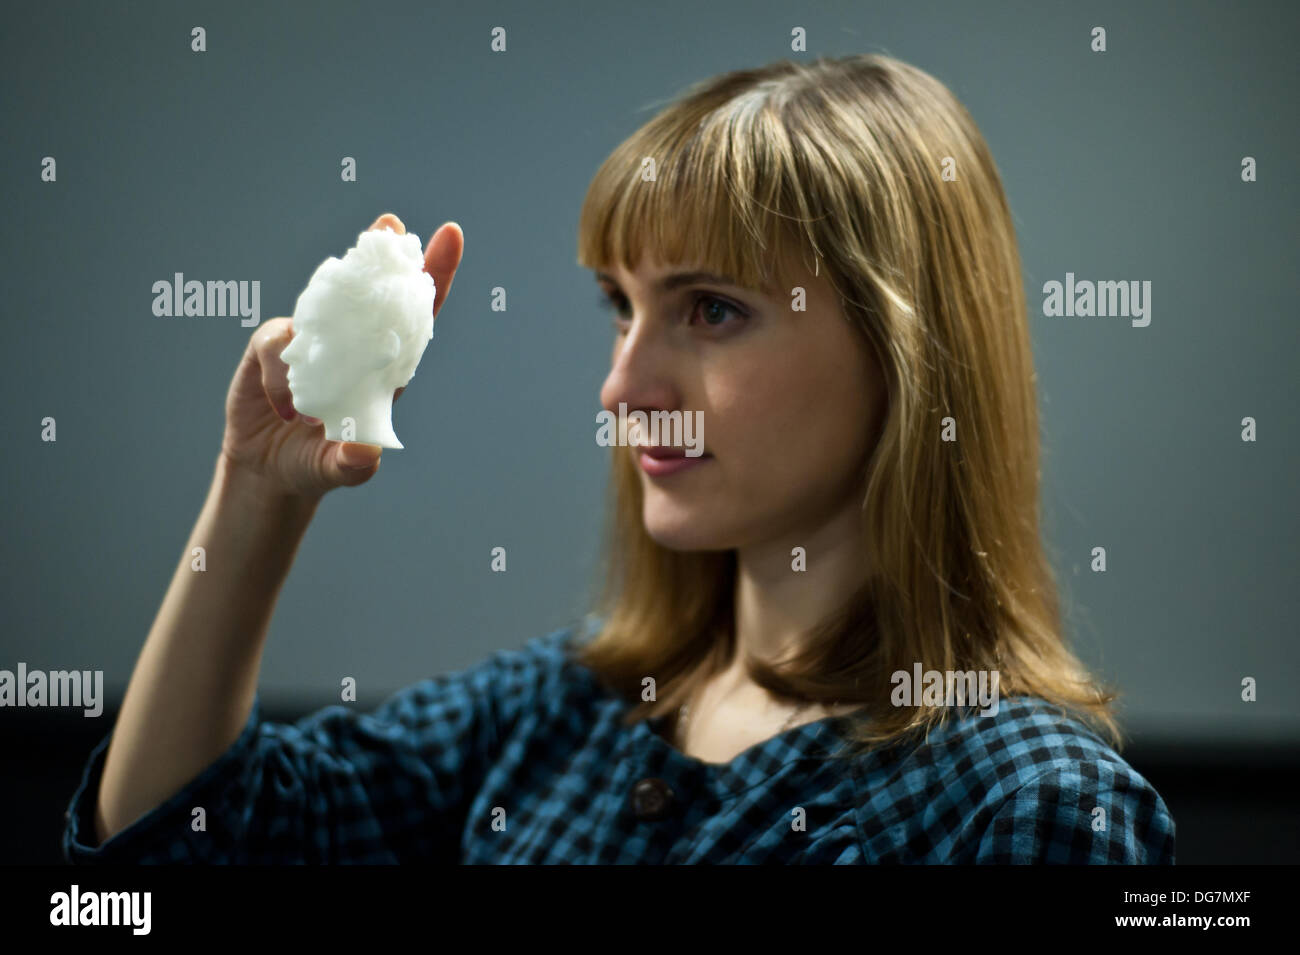 London, UK – 10 October 2013: Kathy Boyce holds on small 3D printed head made of ABS at the Inition, Everything in 3D demo studio in Shoreditch, East London. Stock Photo